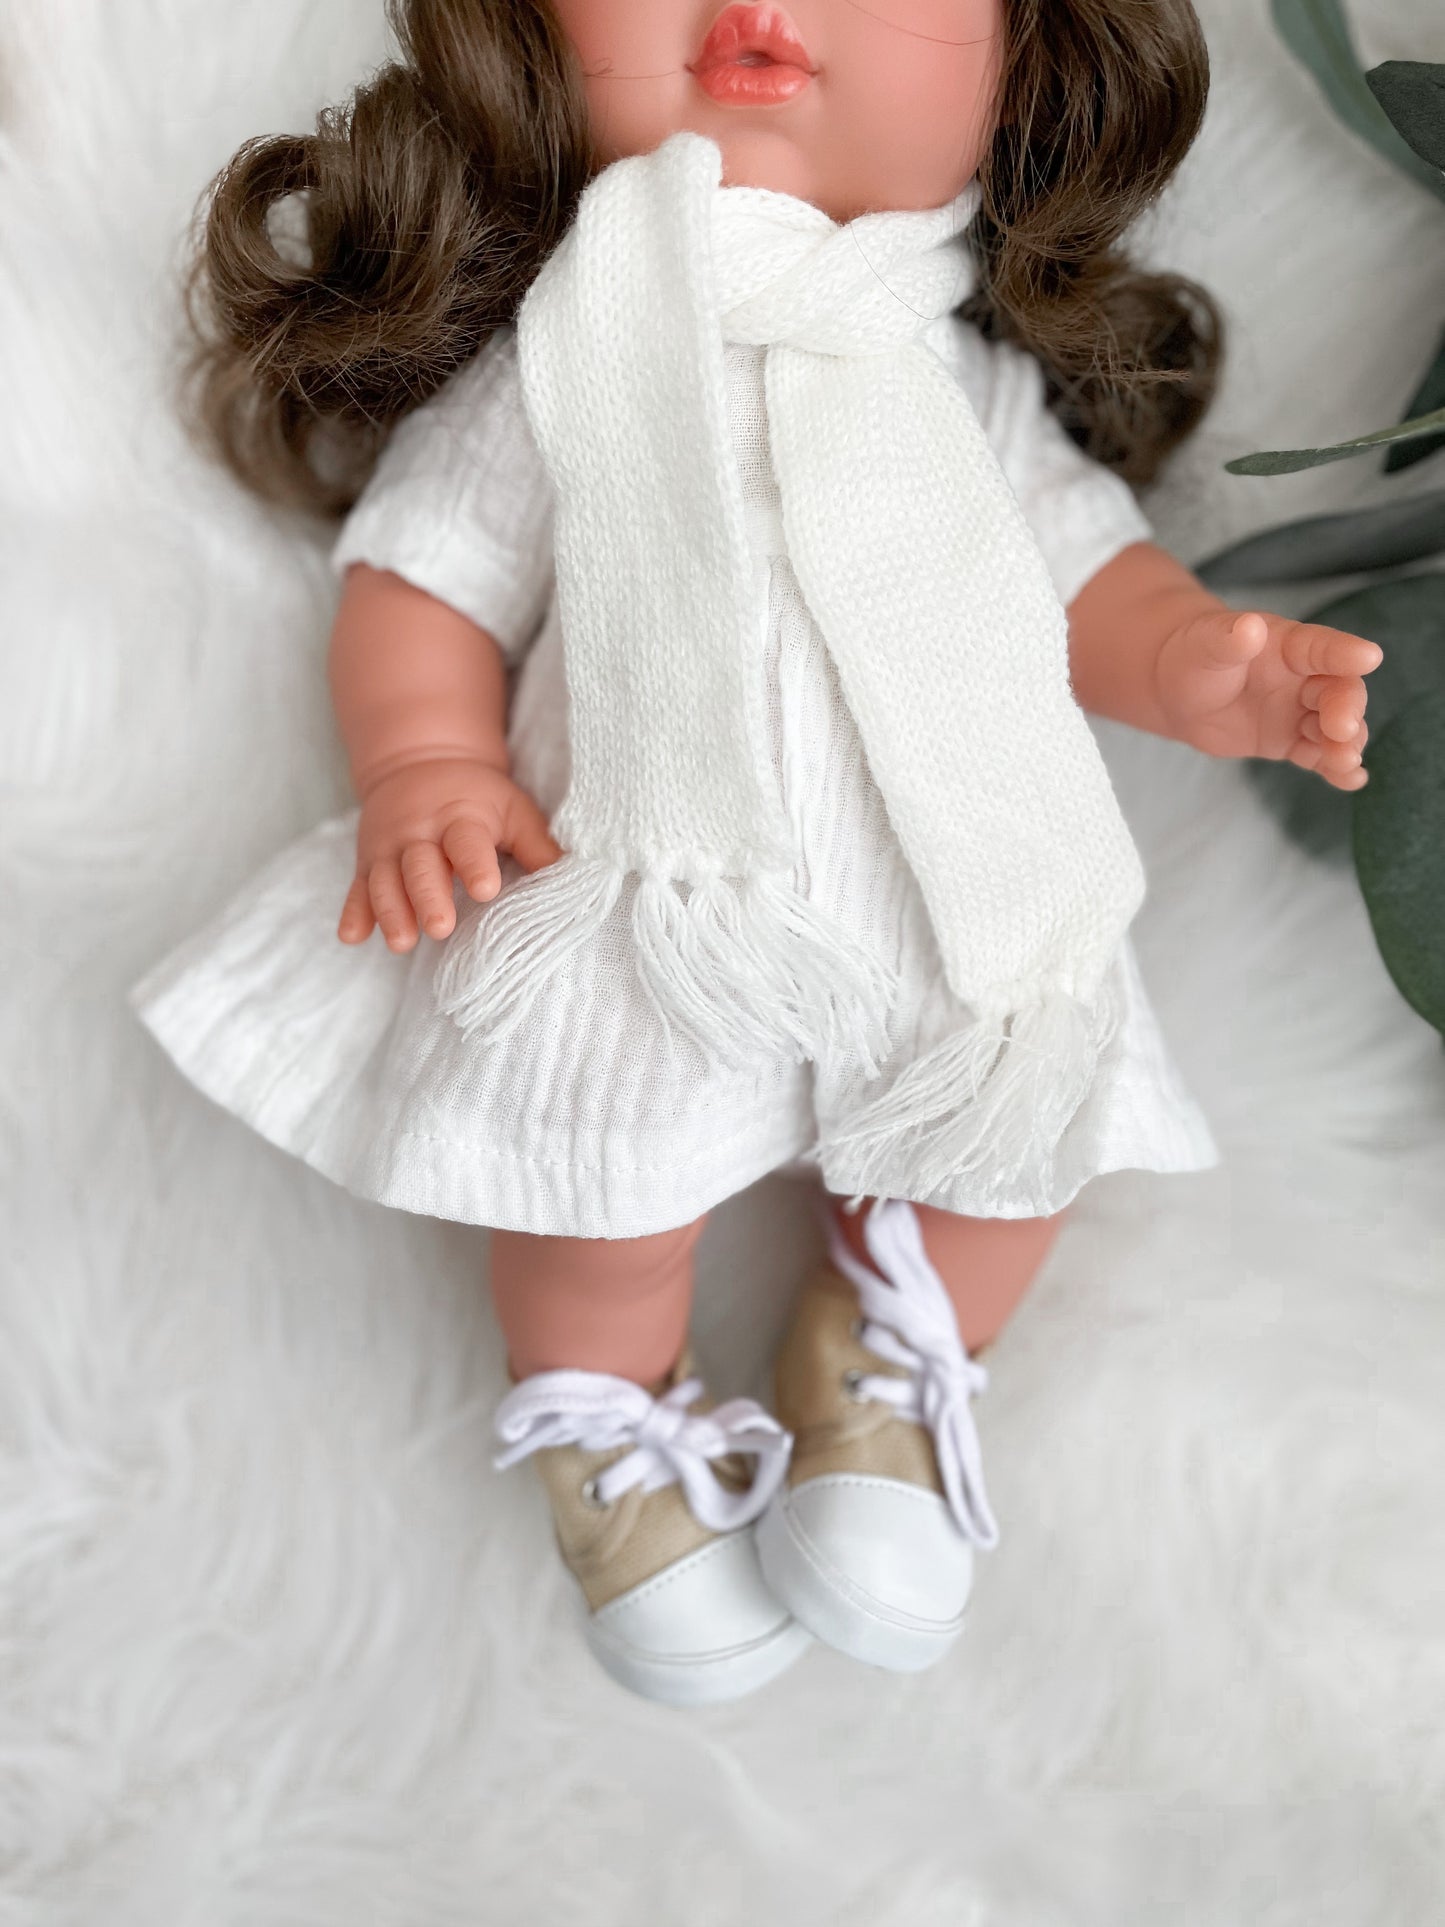 Aria With Boho Outfit- Mini Colettos Girl Doll - OOAK